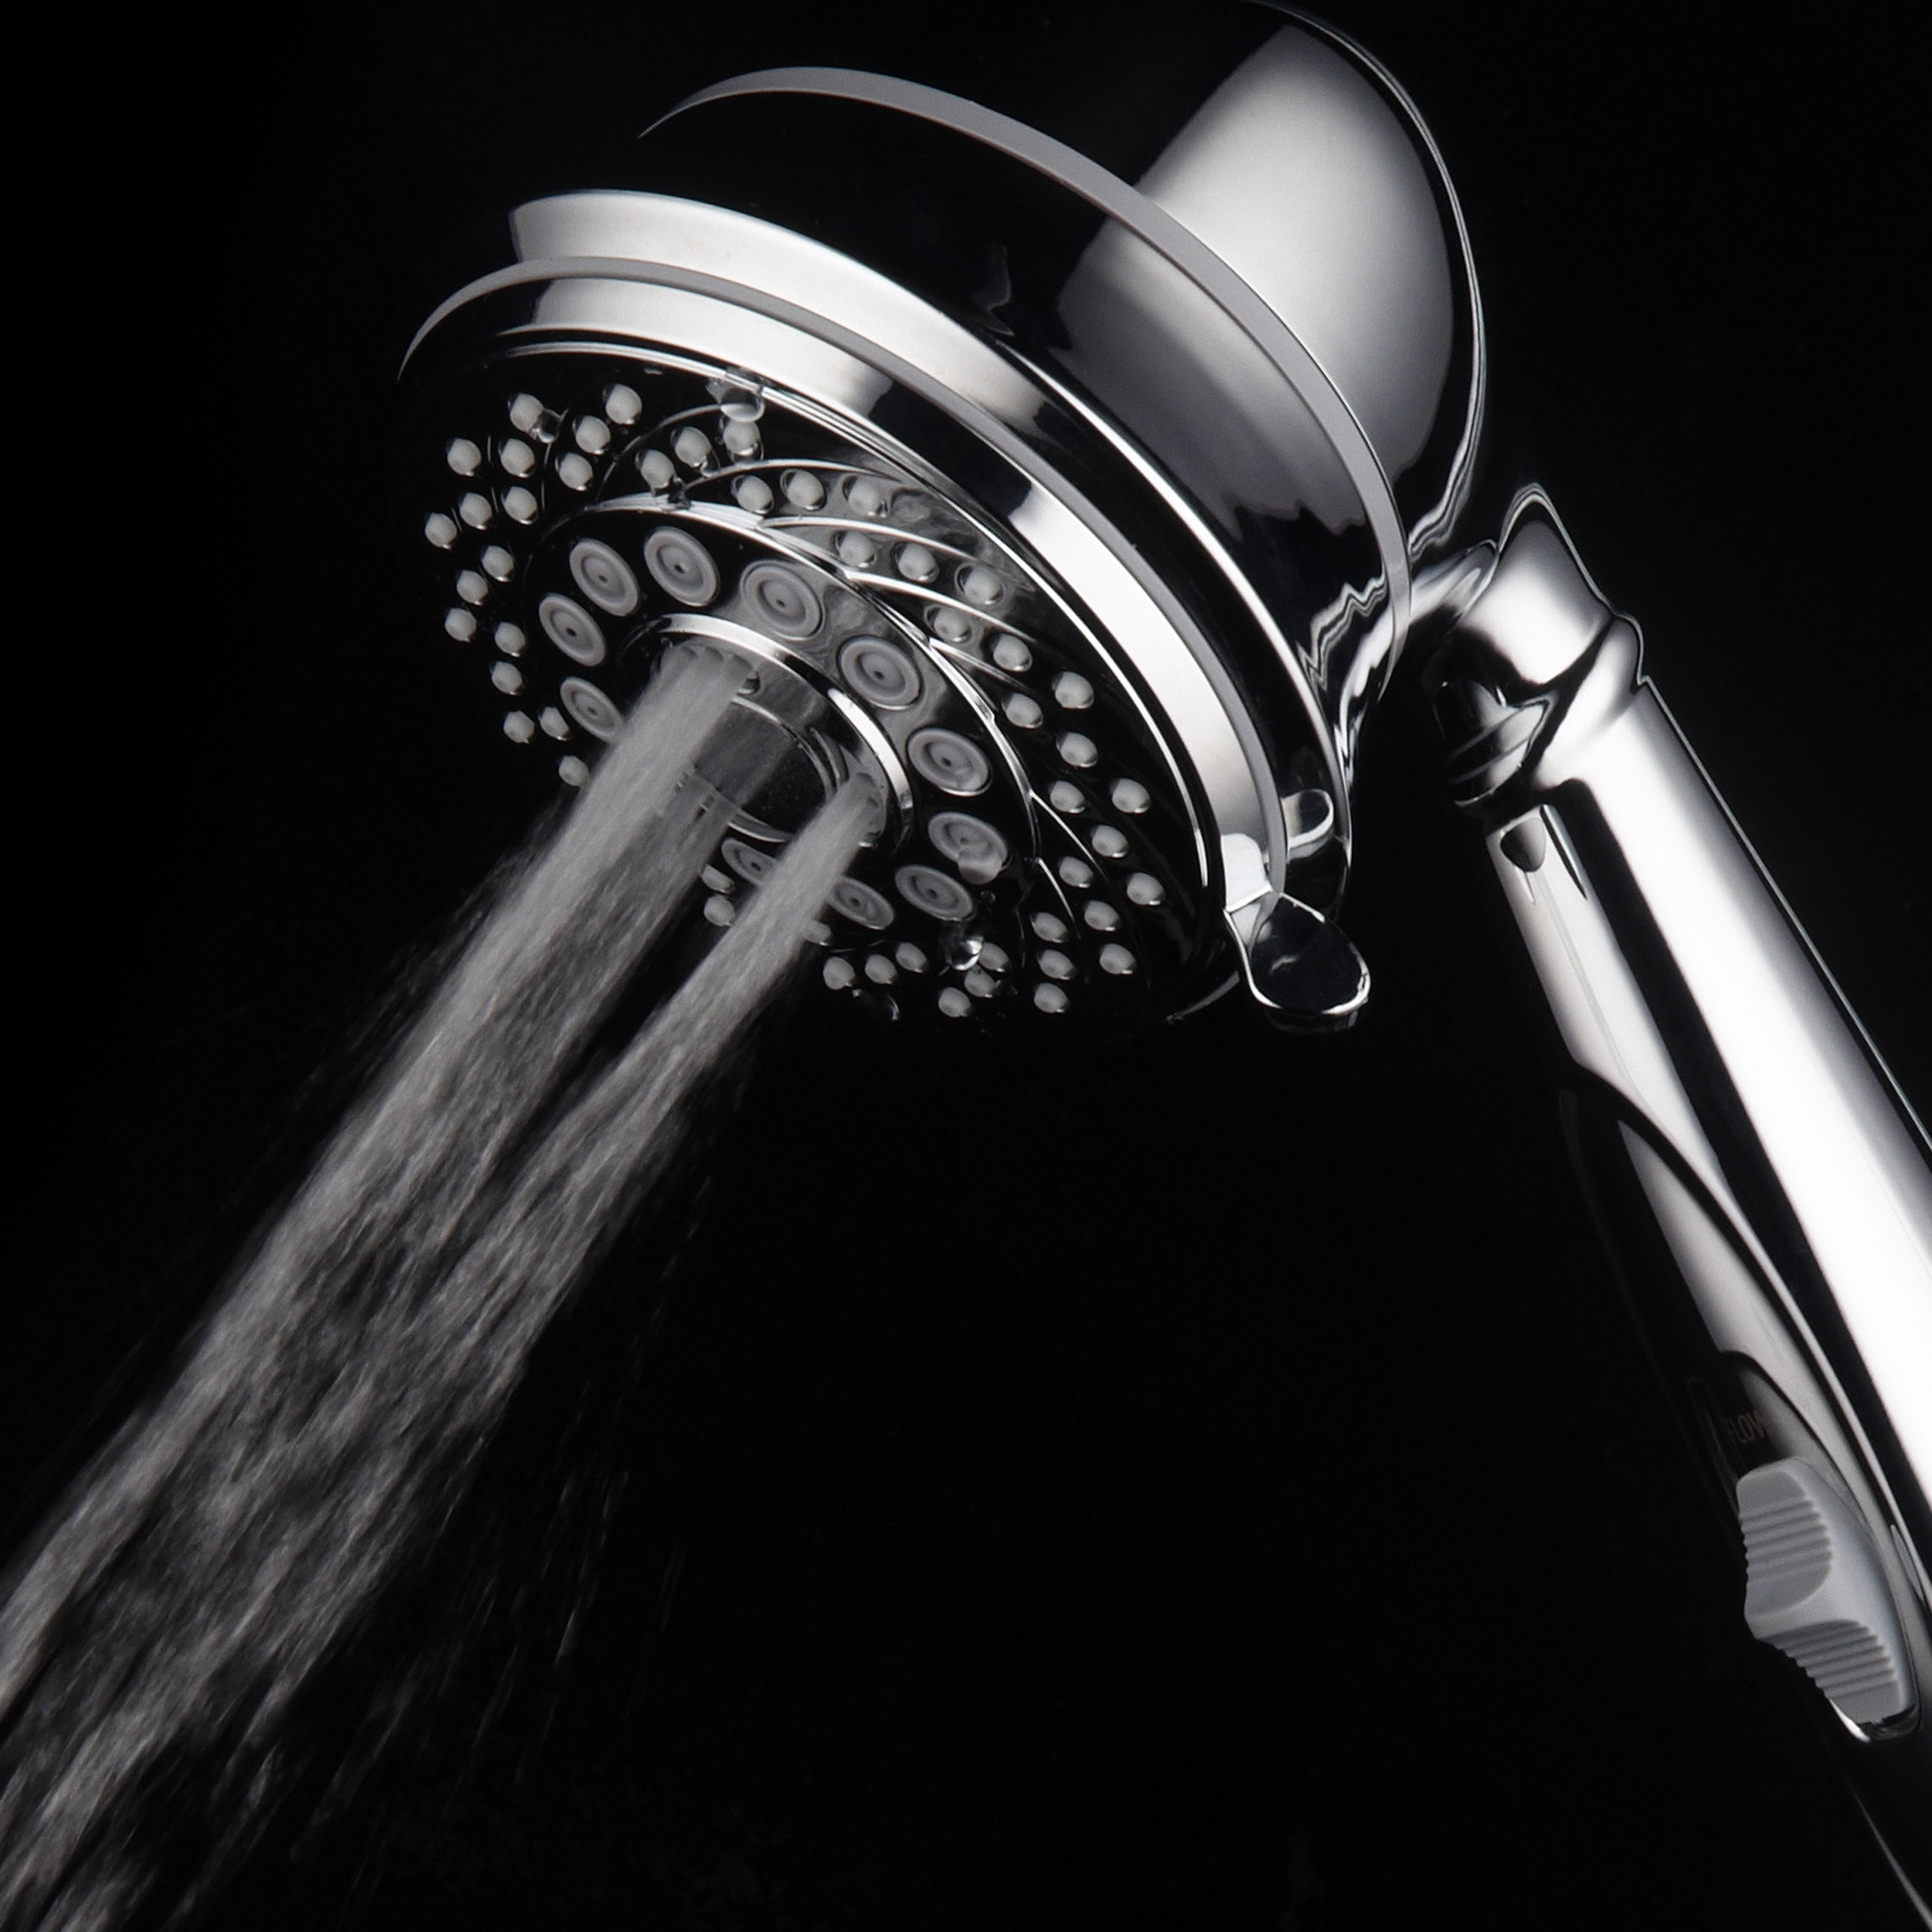 HotelSpa AquaCare 7-Setting, 3-Stage Filtered Handheld Shower Head, Chrome - image 2 of 8